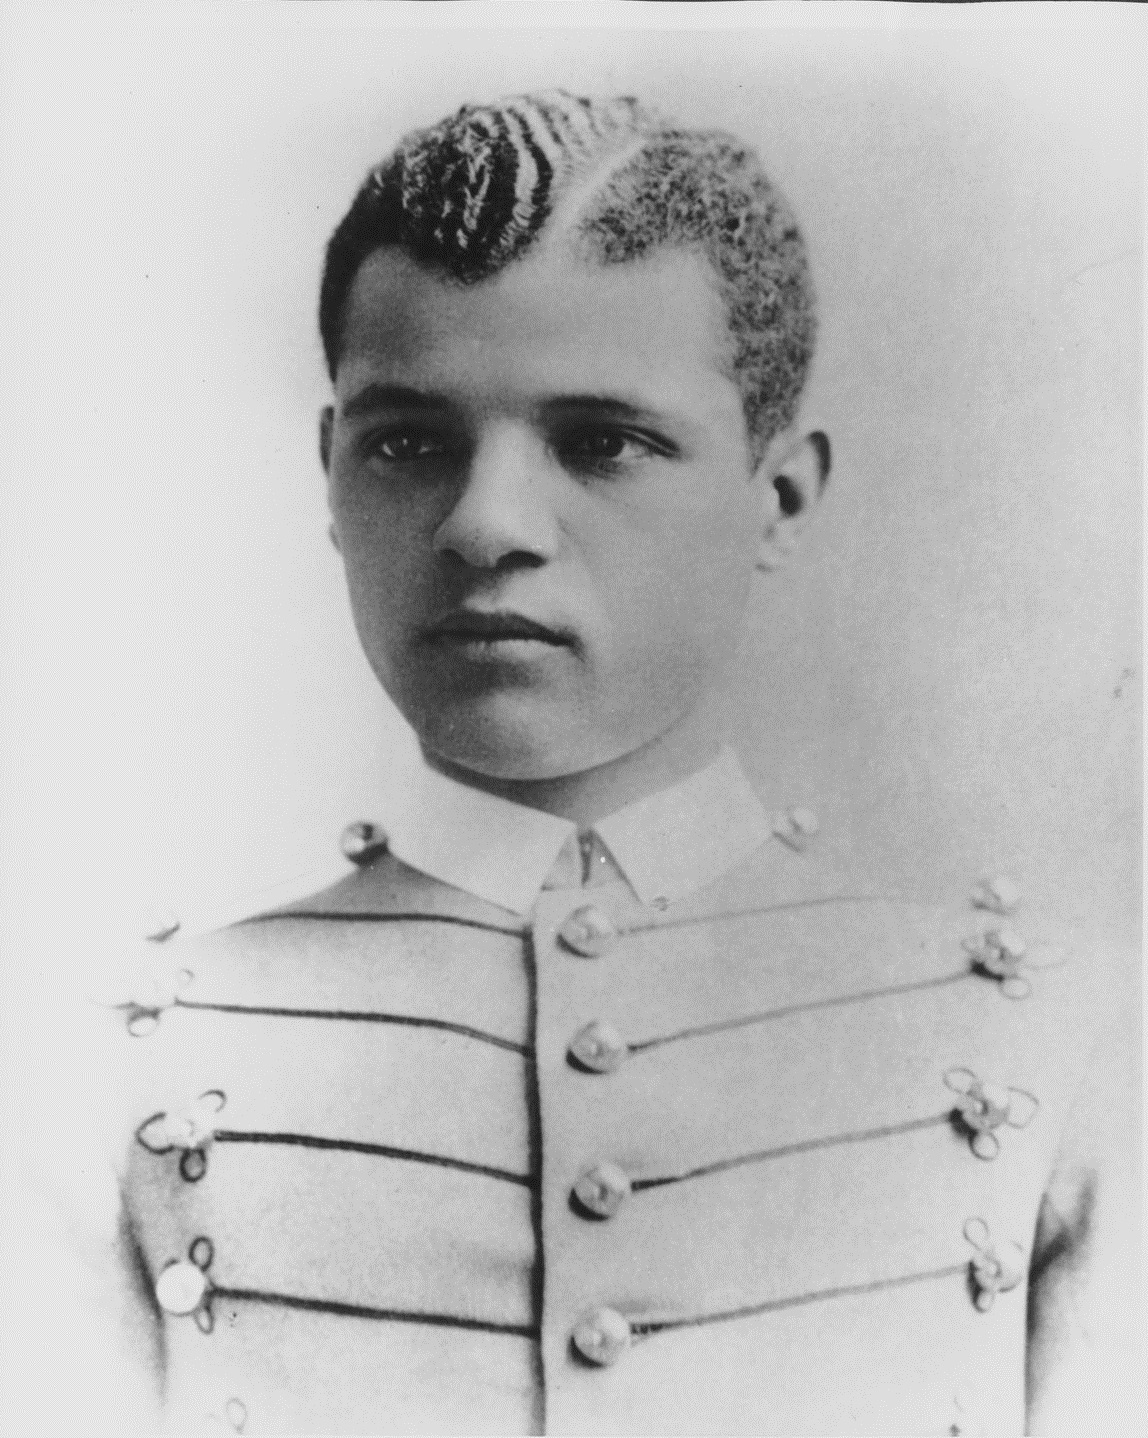 Lt. John H. Alexander, the second African-American graduate of West Point.  Served at Fort Robinson around 1890.